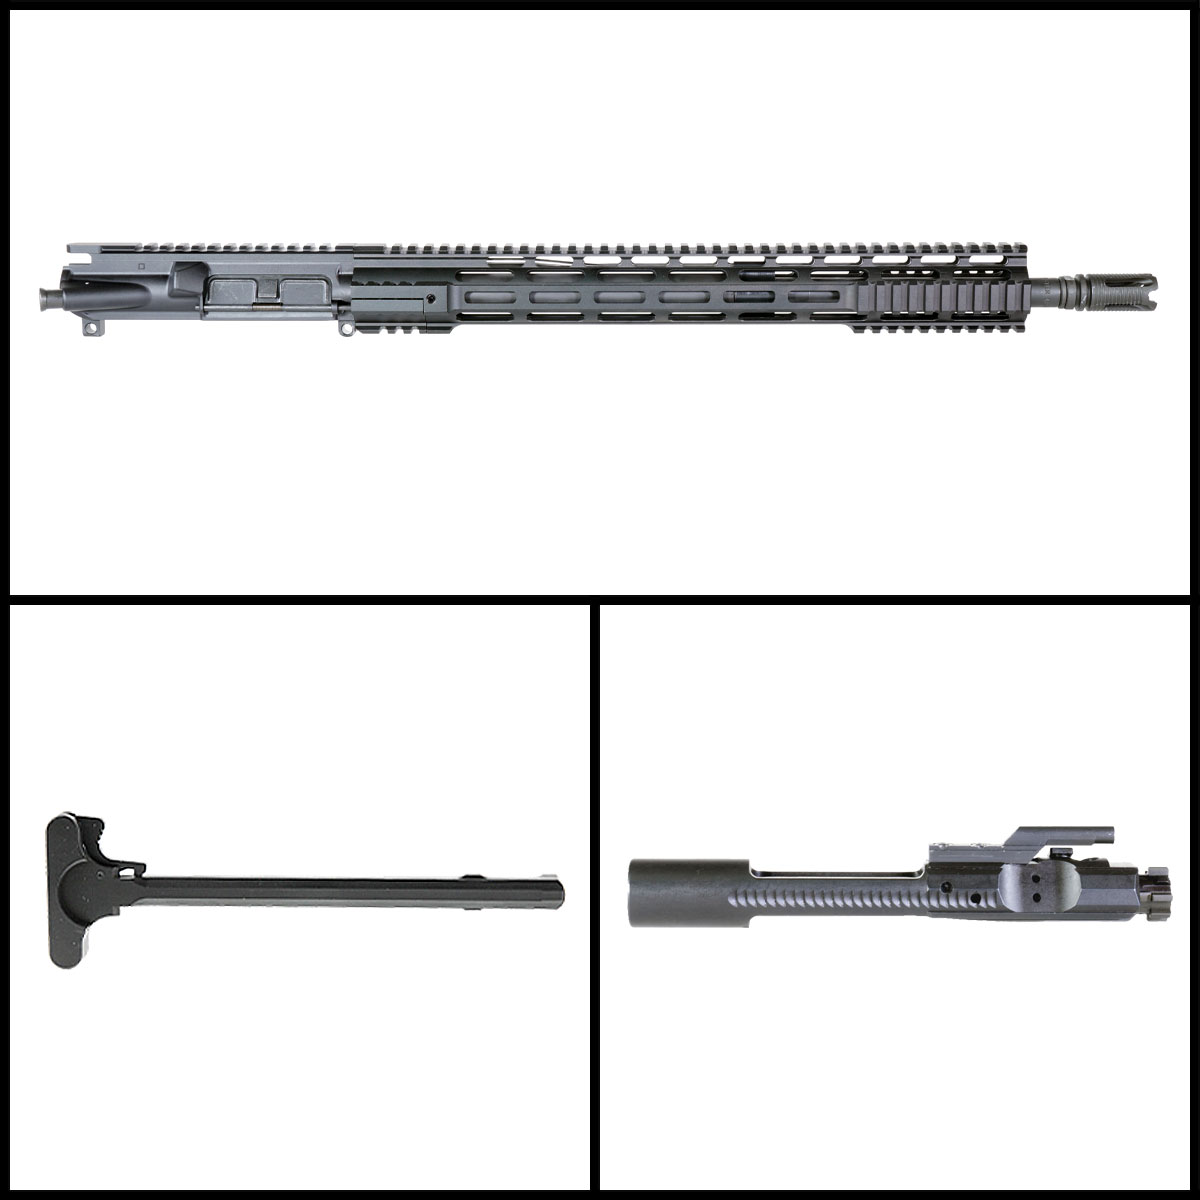 DDS 'Chrome Ally' 18-inch AR-15 .450 Bushmaster Phosphate Rifle Complete Upper Build